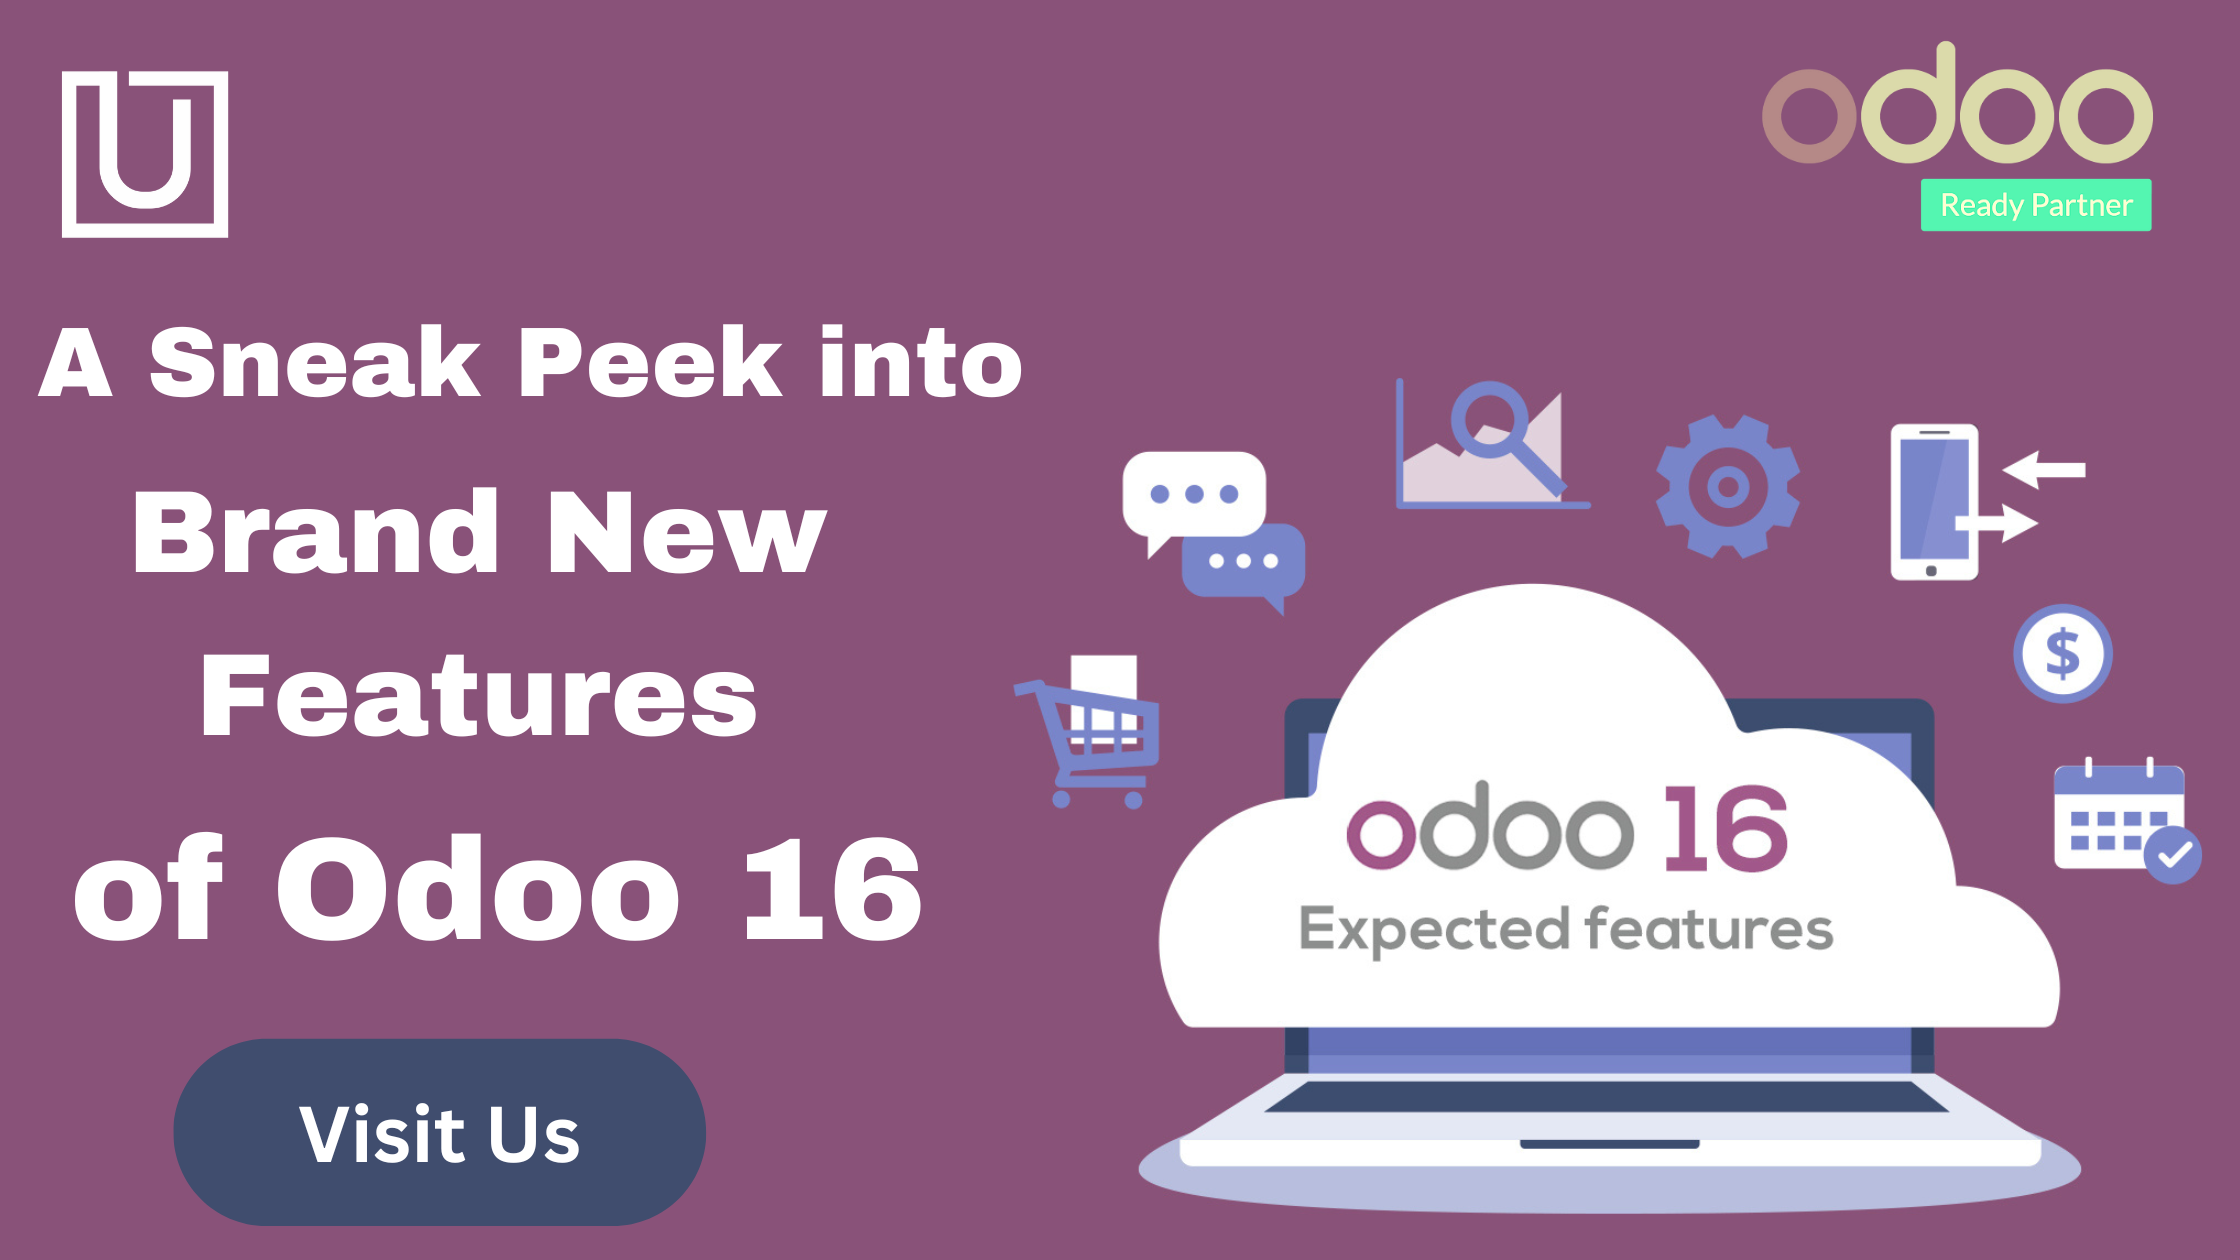 A Sneak Peek into Brand New Features of Odoo 16